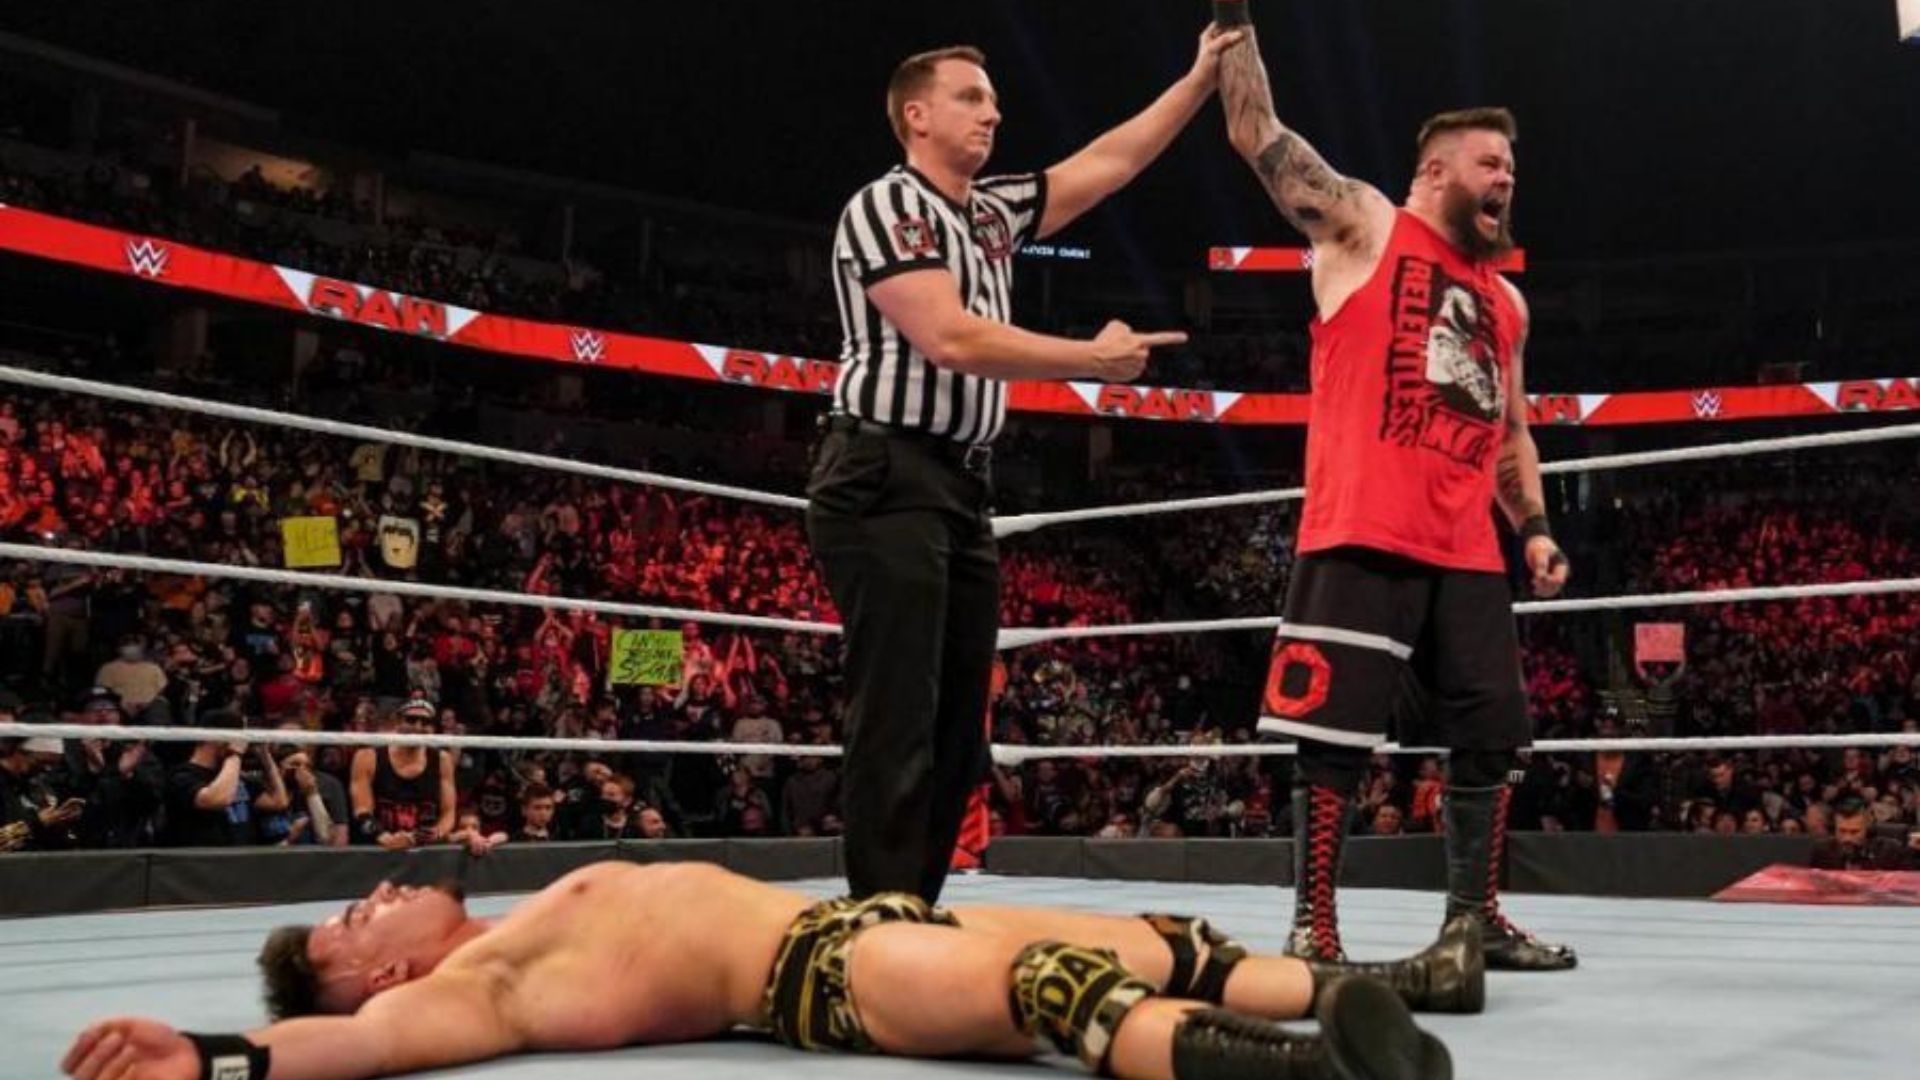 Kevin Owens will face Austin Theory next week on RAW